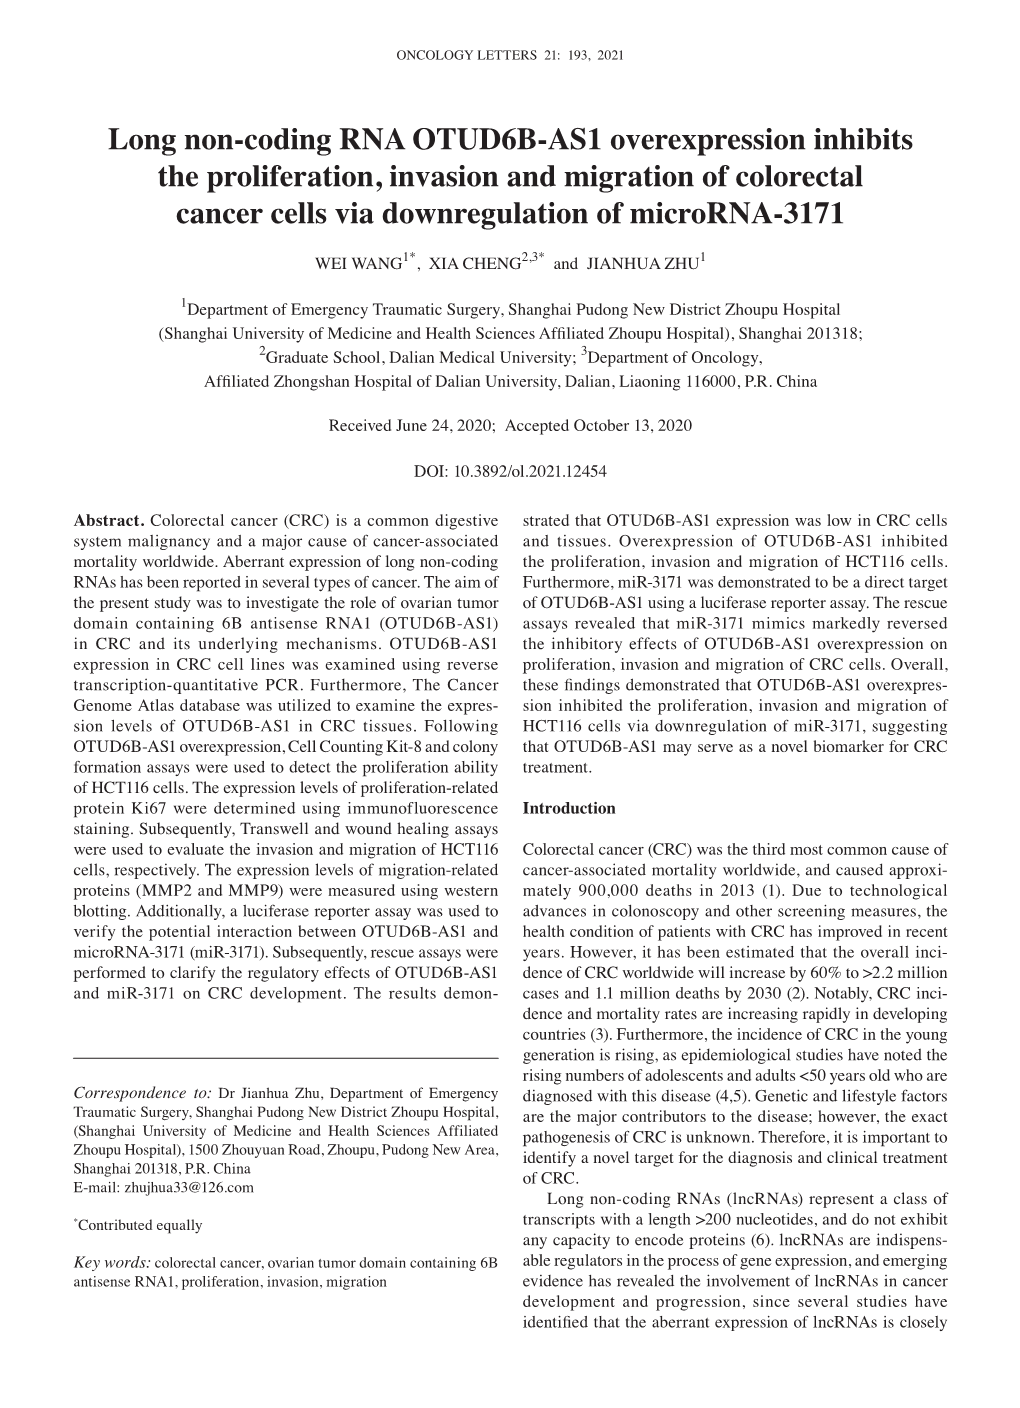 Long Non-Coding RNA OTUD6B-AS1 Overexpression Inhibits the Proliferation, Invasion and Migration of Colorectal Cancer Cells Via Downregulation of Microrna-3171